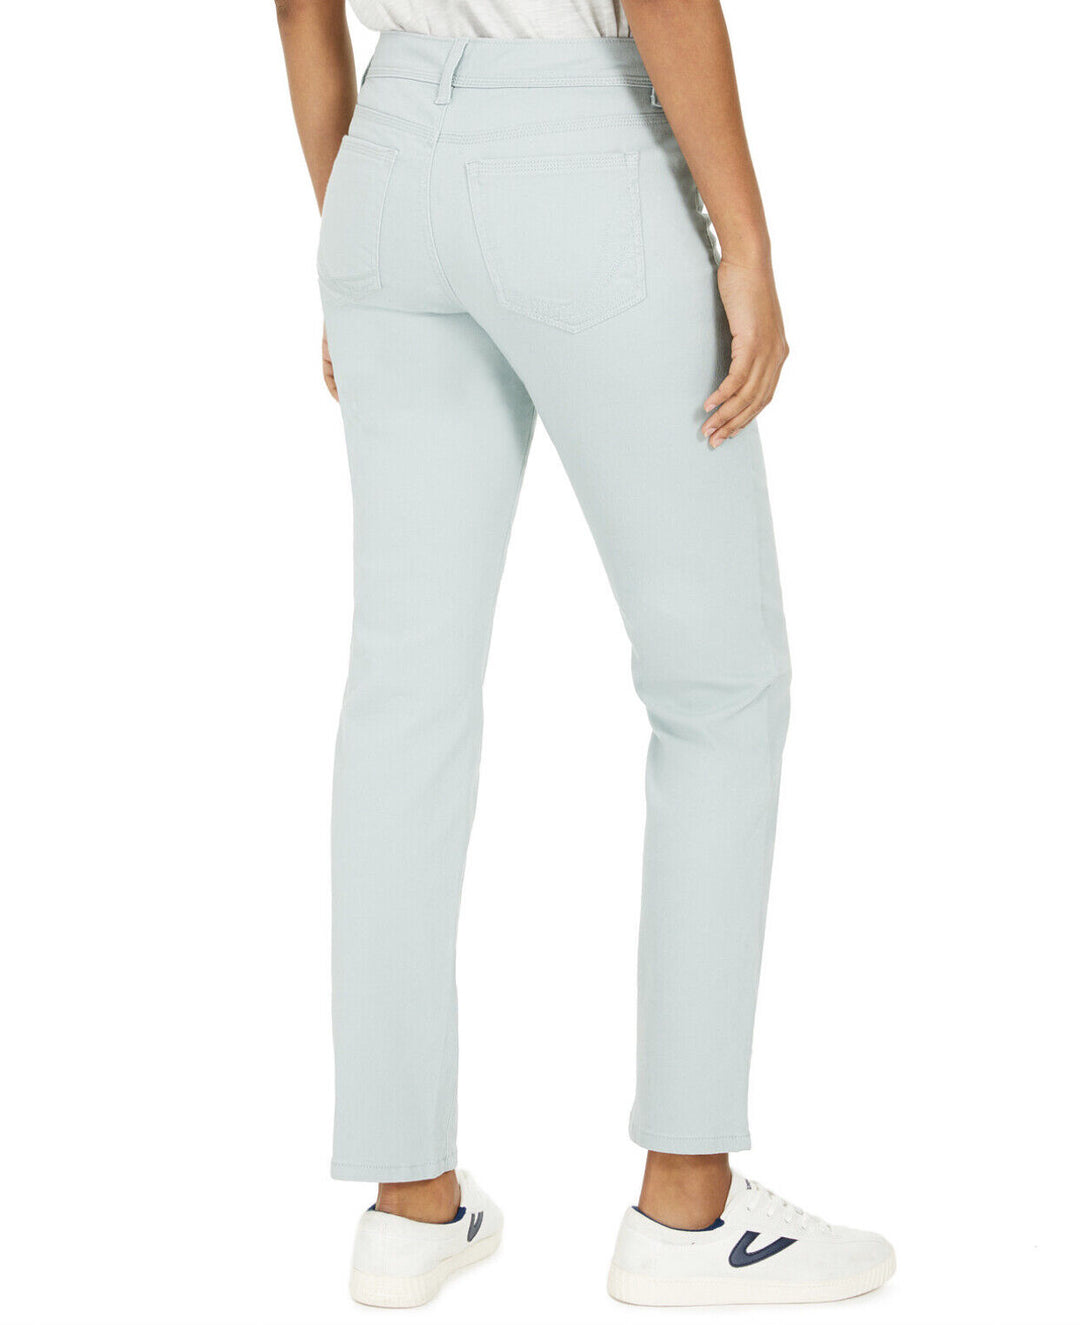 Women's Tummy Control Straight Leg Jeans Frost Blue High Rise